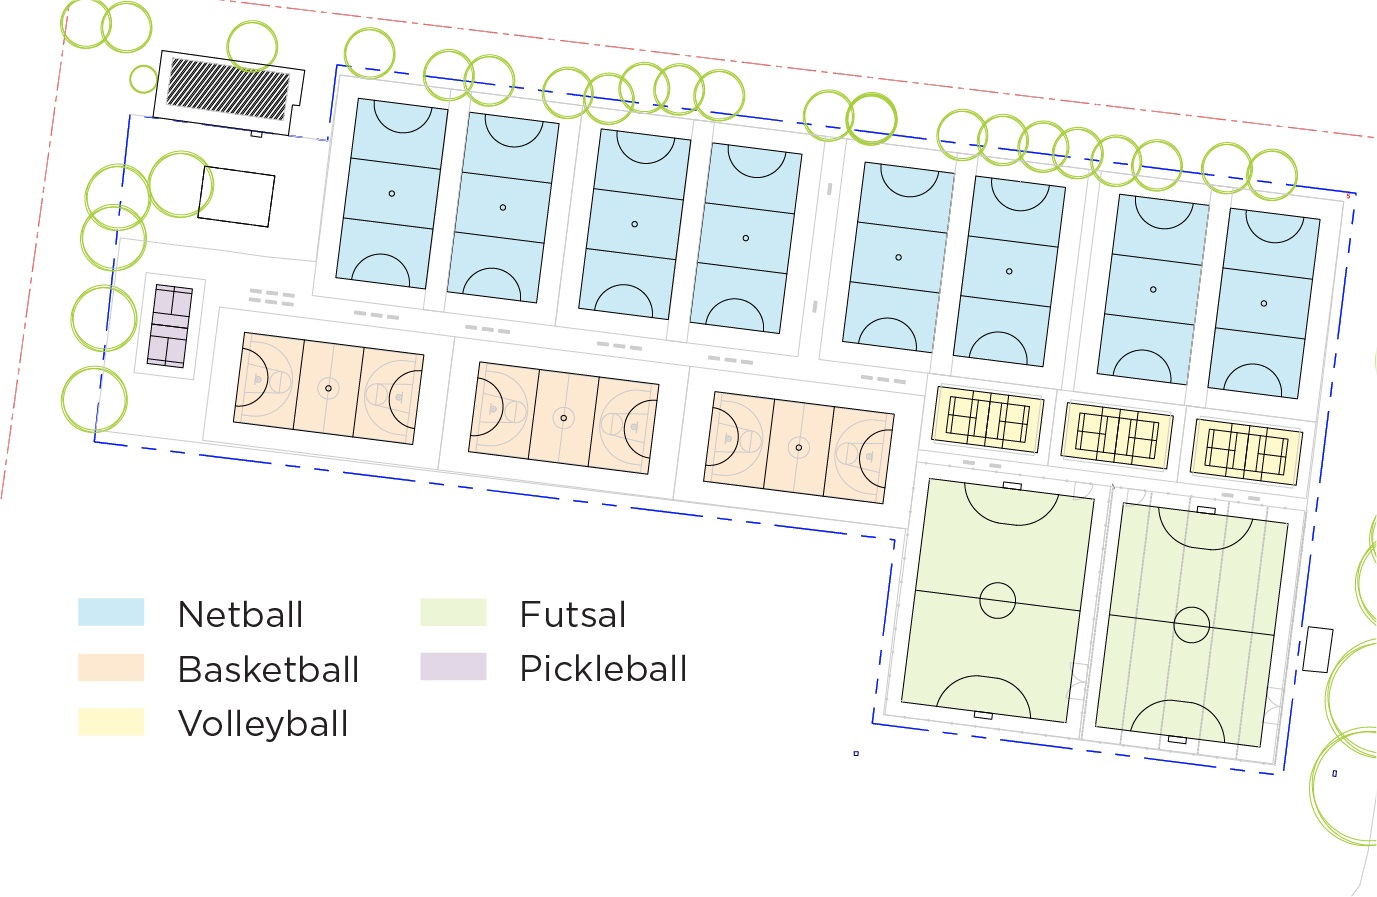 Map of new Endeavour Sports Park courts plan showing netball, basketball, volleyball, futsal and pickelball courts